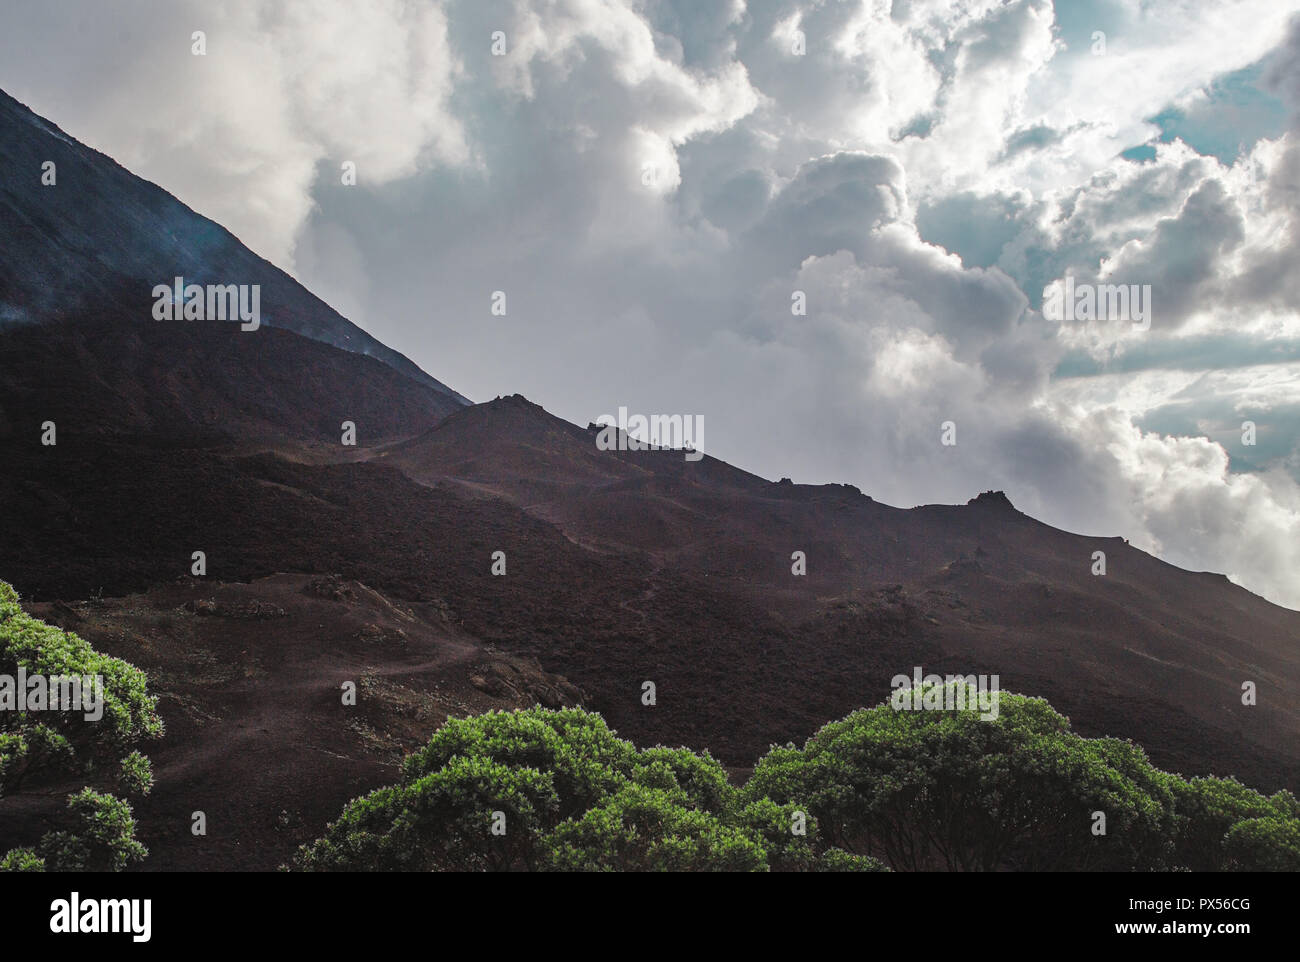 Tourists hike the changing landscapes around the Volcan Pacaya, one of Guatemala's most active volcanoes, from black volcanic rock to lush green fores Stock Photo